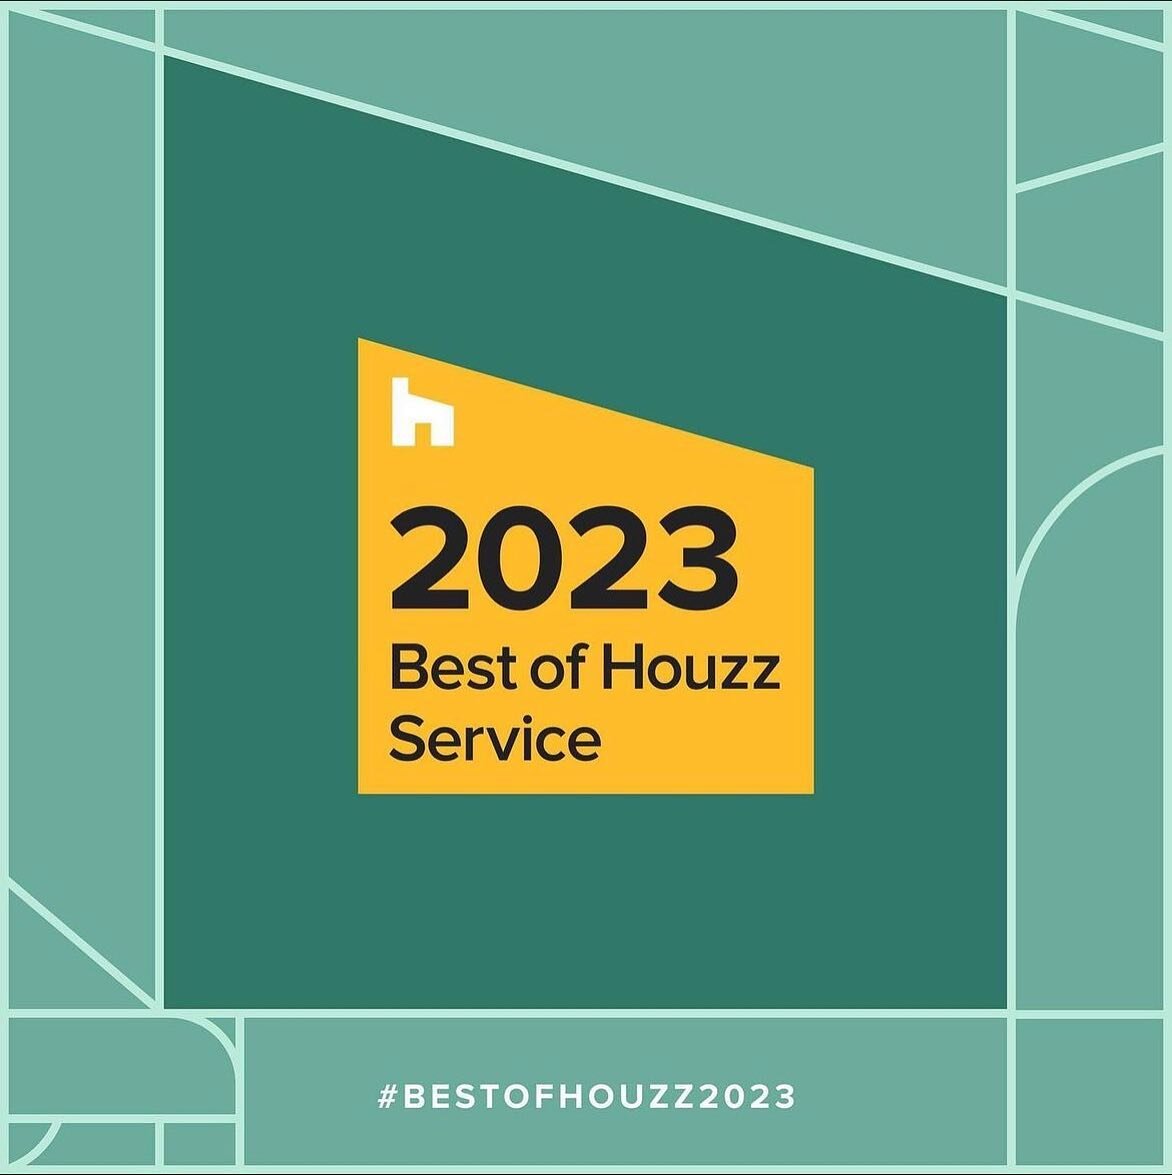 So proud to announce we received another Best of Houzz award for our exceptional service. We are very thankful for each and every client who trusts us with their homes. We do our absolute best to make their experience with us one that&rsquo;s fun and